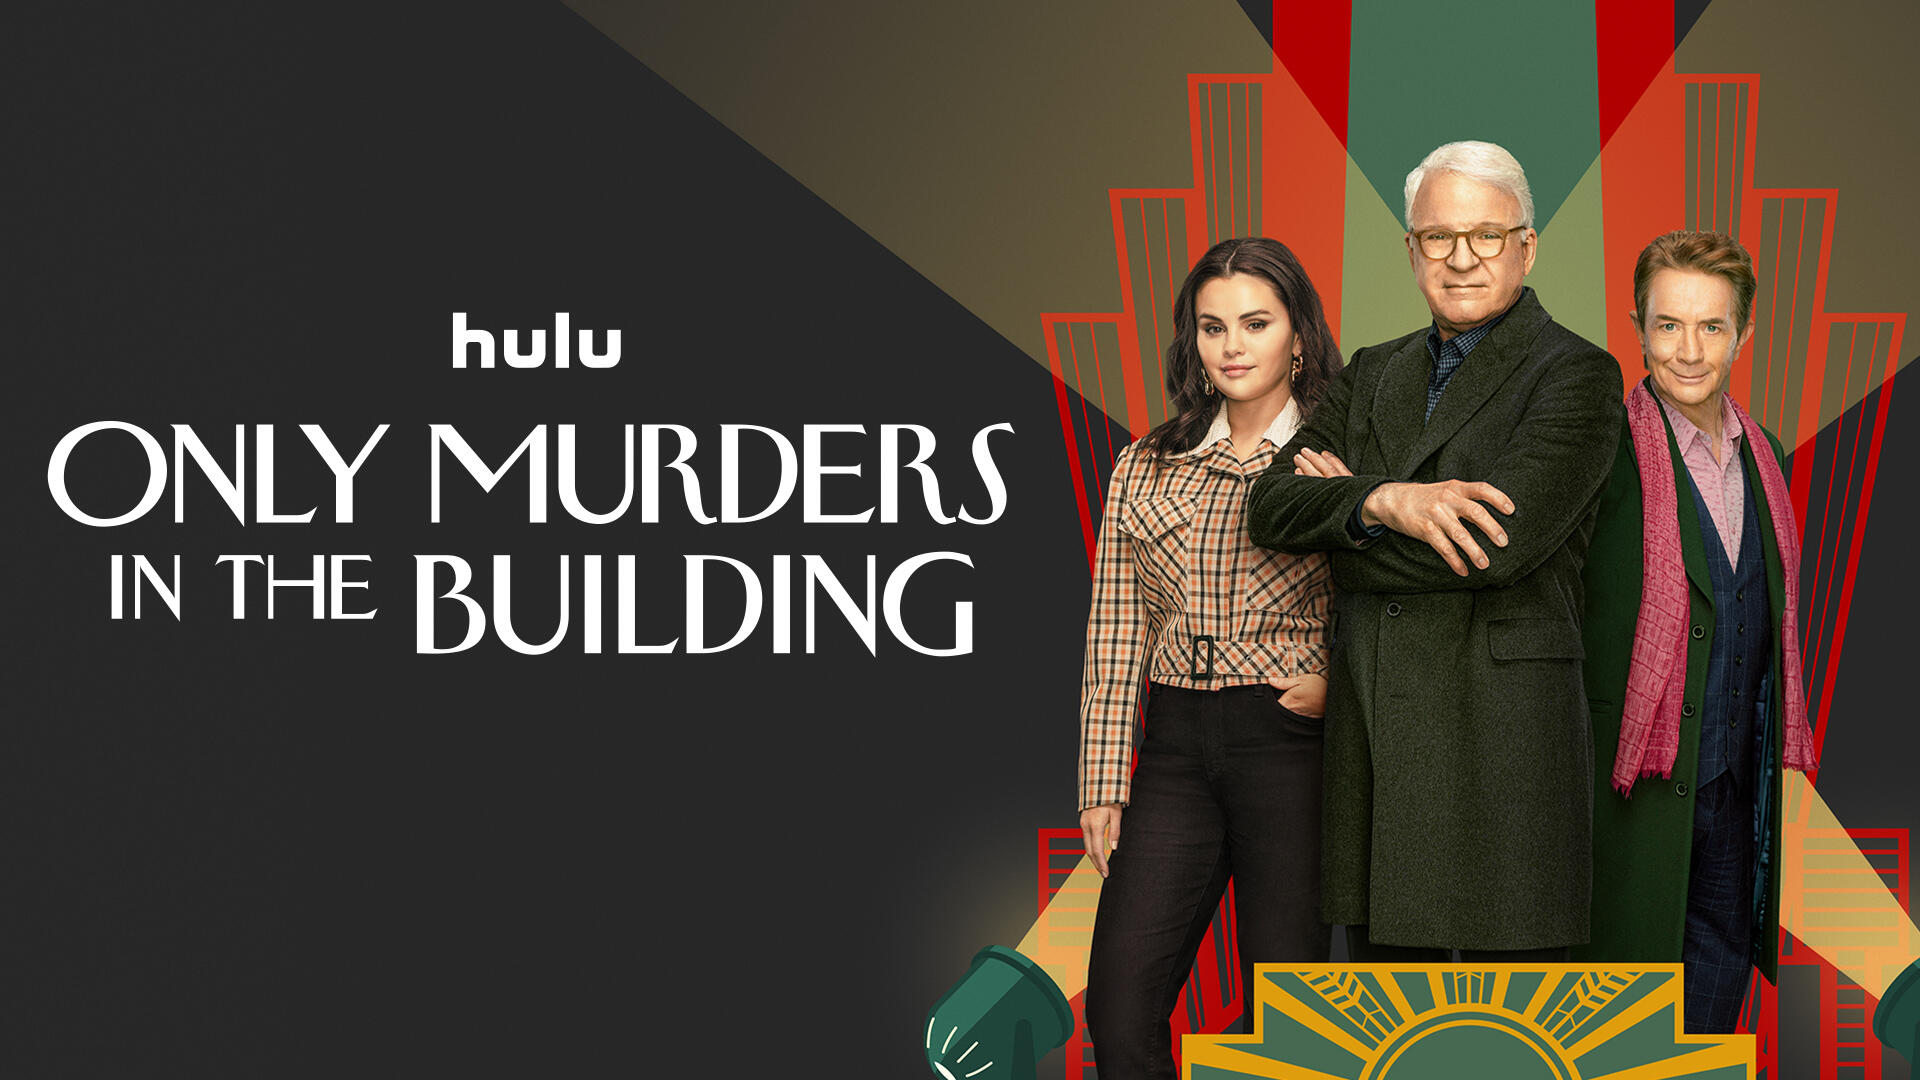 Only Murders In The Building -- Season 3 -- From the minds of Steve Martin, Dan Fogelman and John Hoffman comes a comedic murder-mystery series for the ages. “Only Murders In The Building” follows three strangers (Steve Martin, Martin Short and Selena Gomez) who share an obsession with true crime and suddenly find themselves wrapped up in one. When a grisly death occurs inside their exclusive Upper West Side apartment building, the trio suspects murder and employs their precise knowledge of true crime to investigate the truth. As they record a podcast of their own to document the case, the three unravel the complex secrets of the building which stretch back years. Perhaps even more explosive are the lies they tell one another. Soon, the endangered trio comes to realize a killer might be living amongst them as they race to decipher the mounting clues before it’s too late. Selena Gomez (Mabel), Steve Martin (Charles) and Martin Short (Oliver), shown. (Courtesy of Hulu)